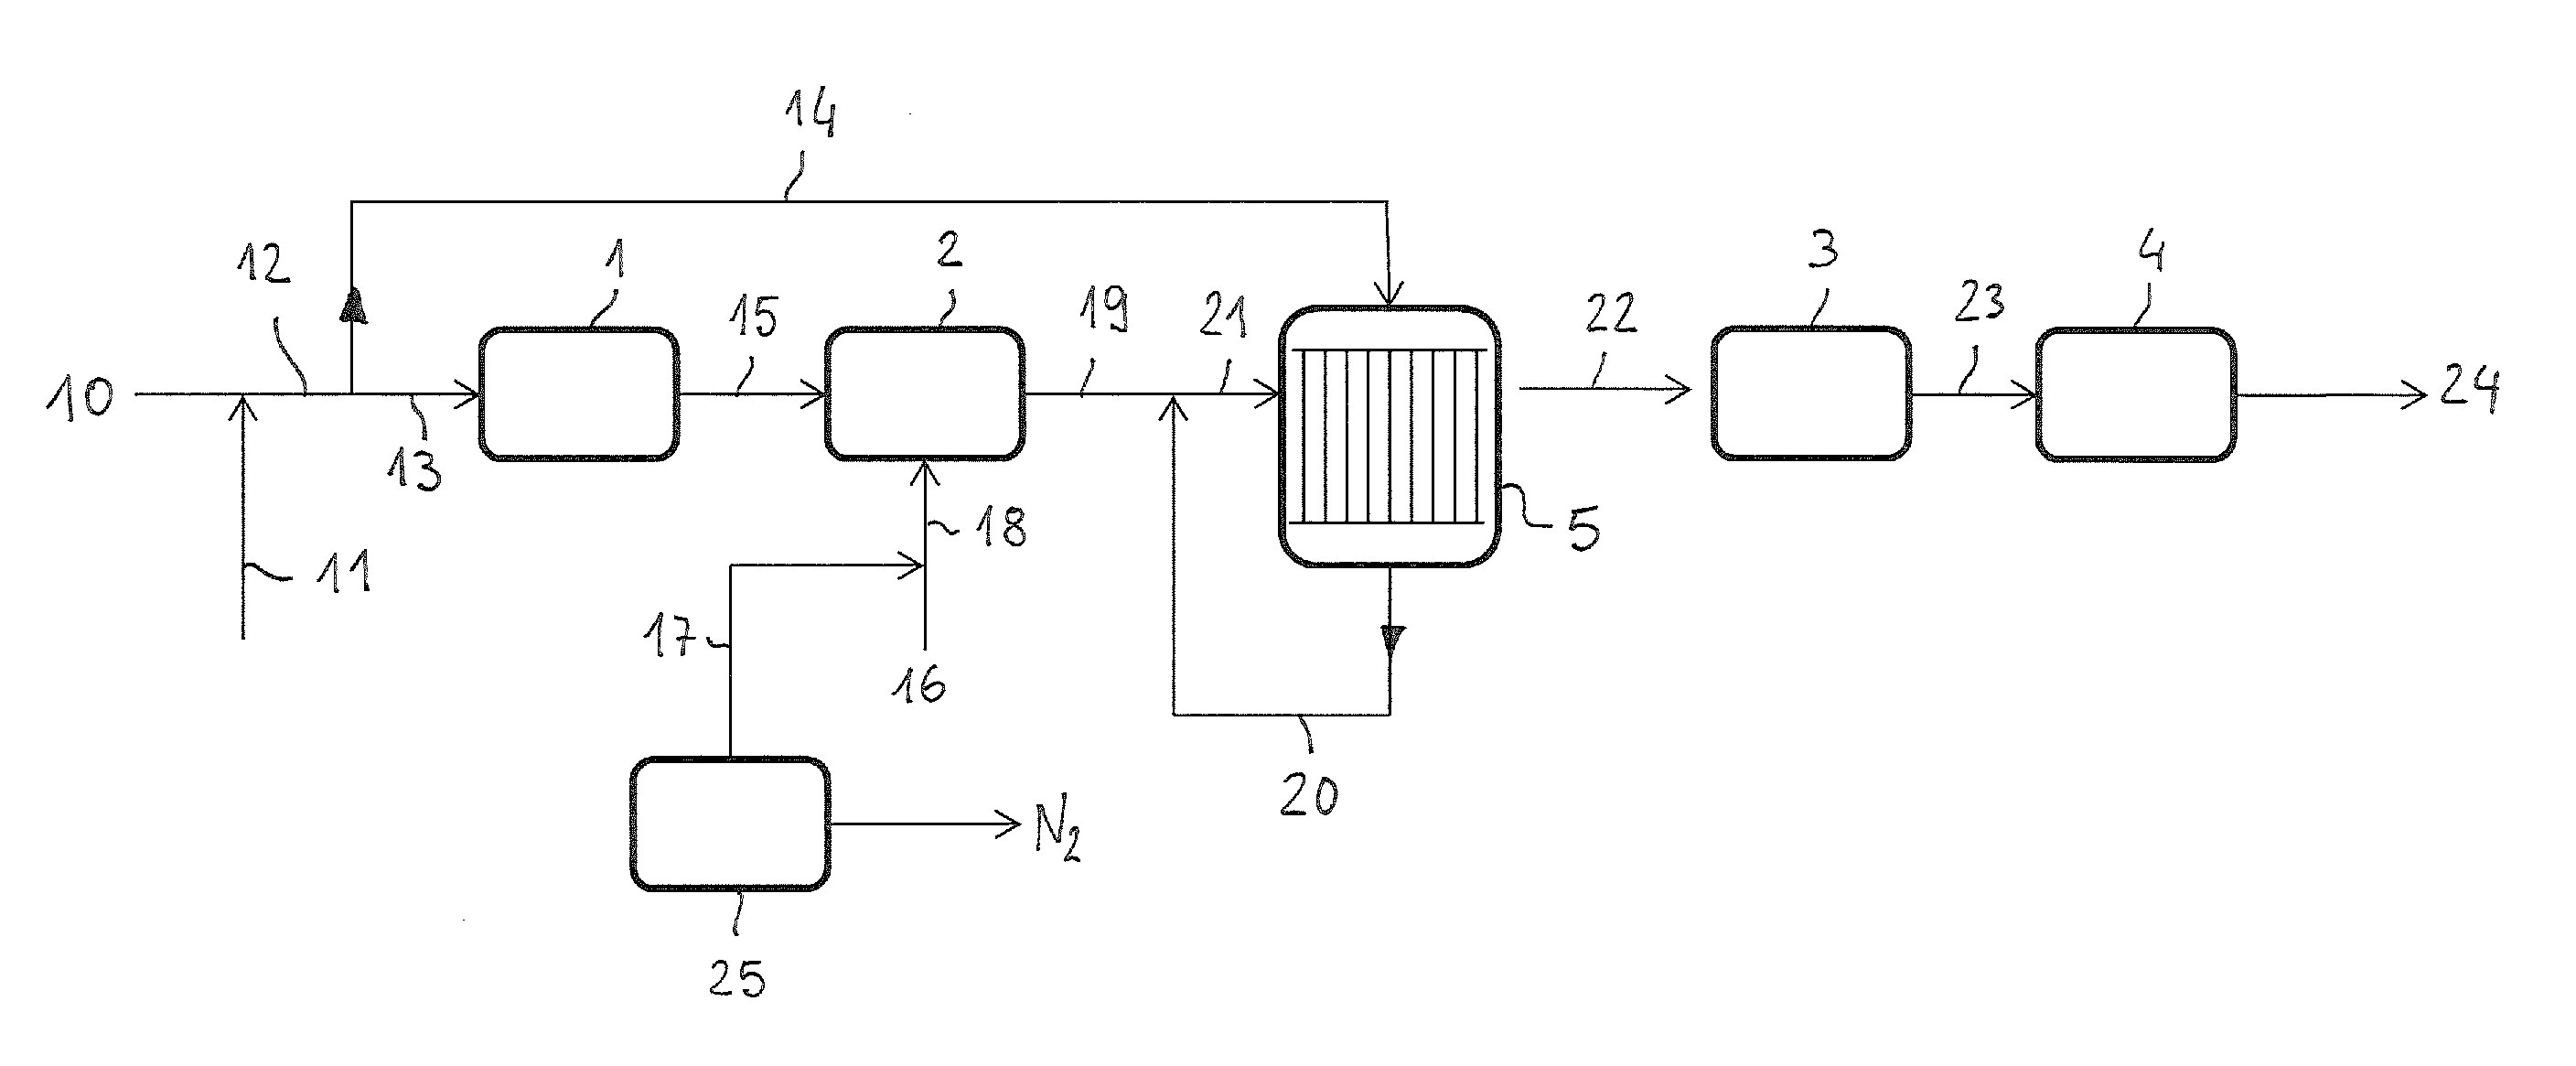 Process for producing ammonia synthesis gas and a method for revamping a front-end of an ammonia plant